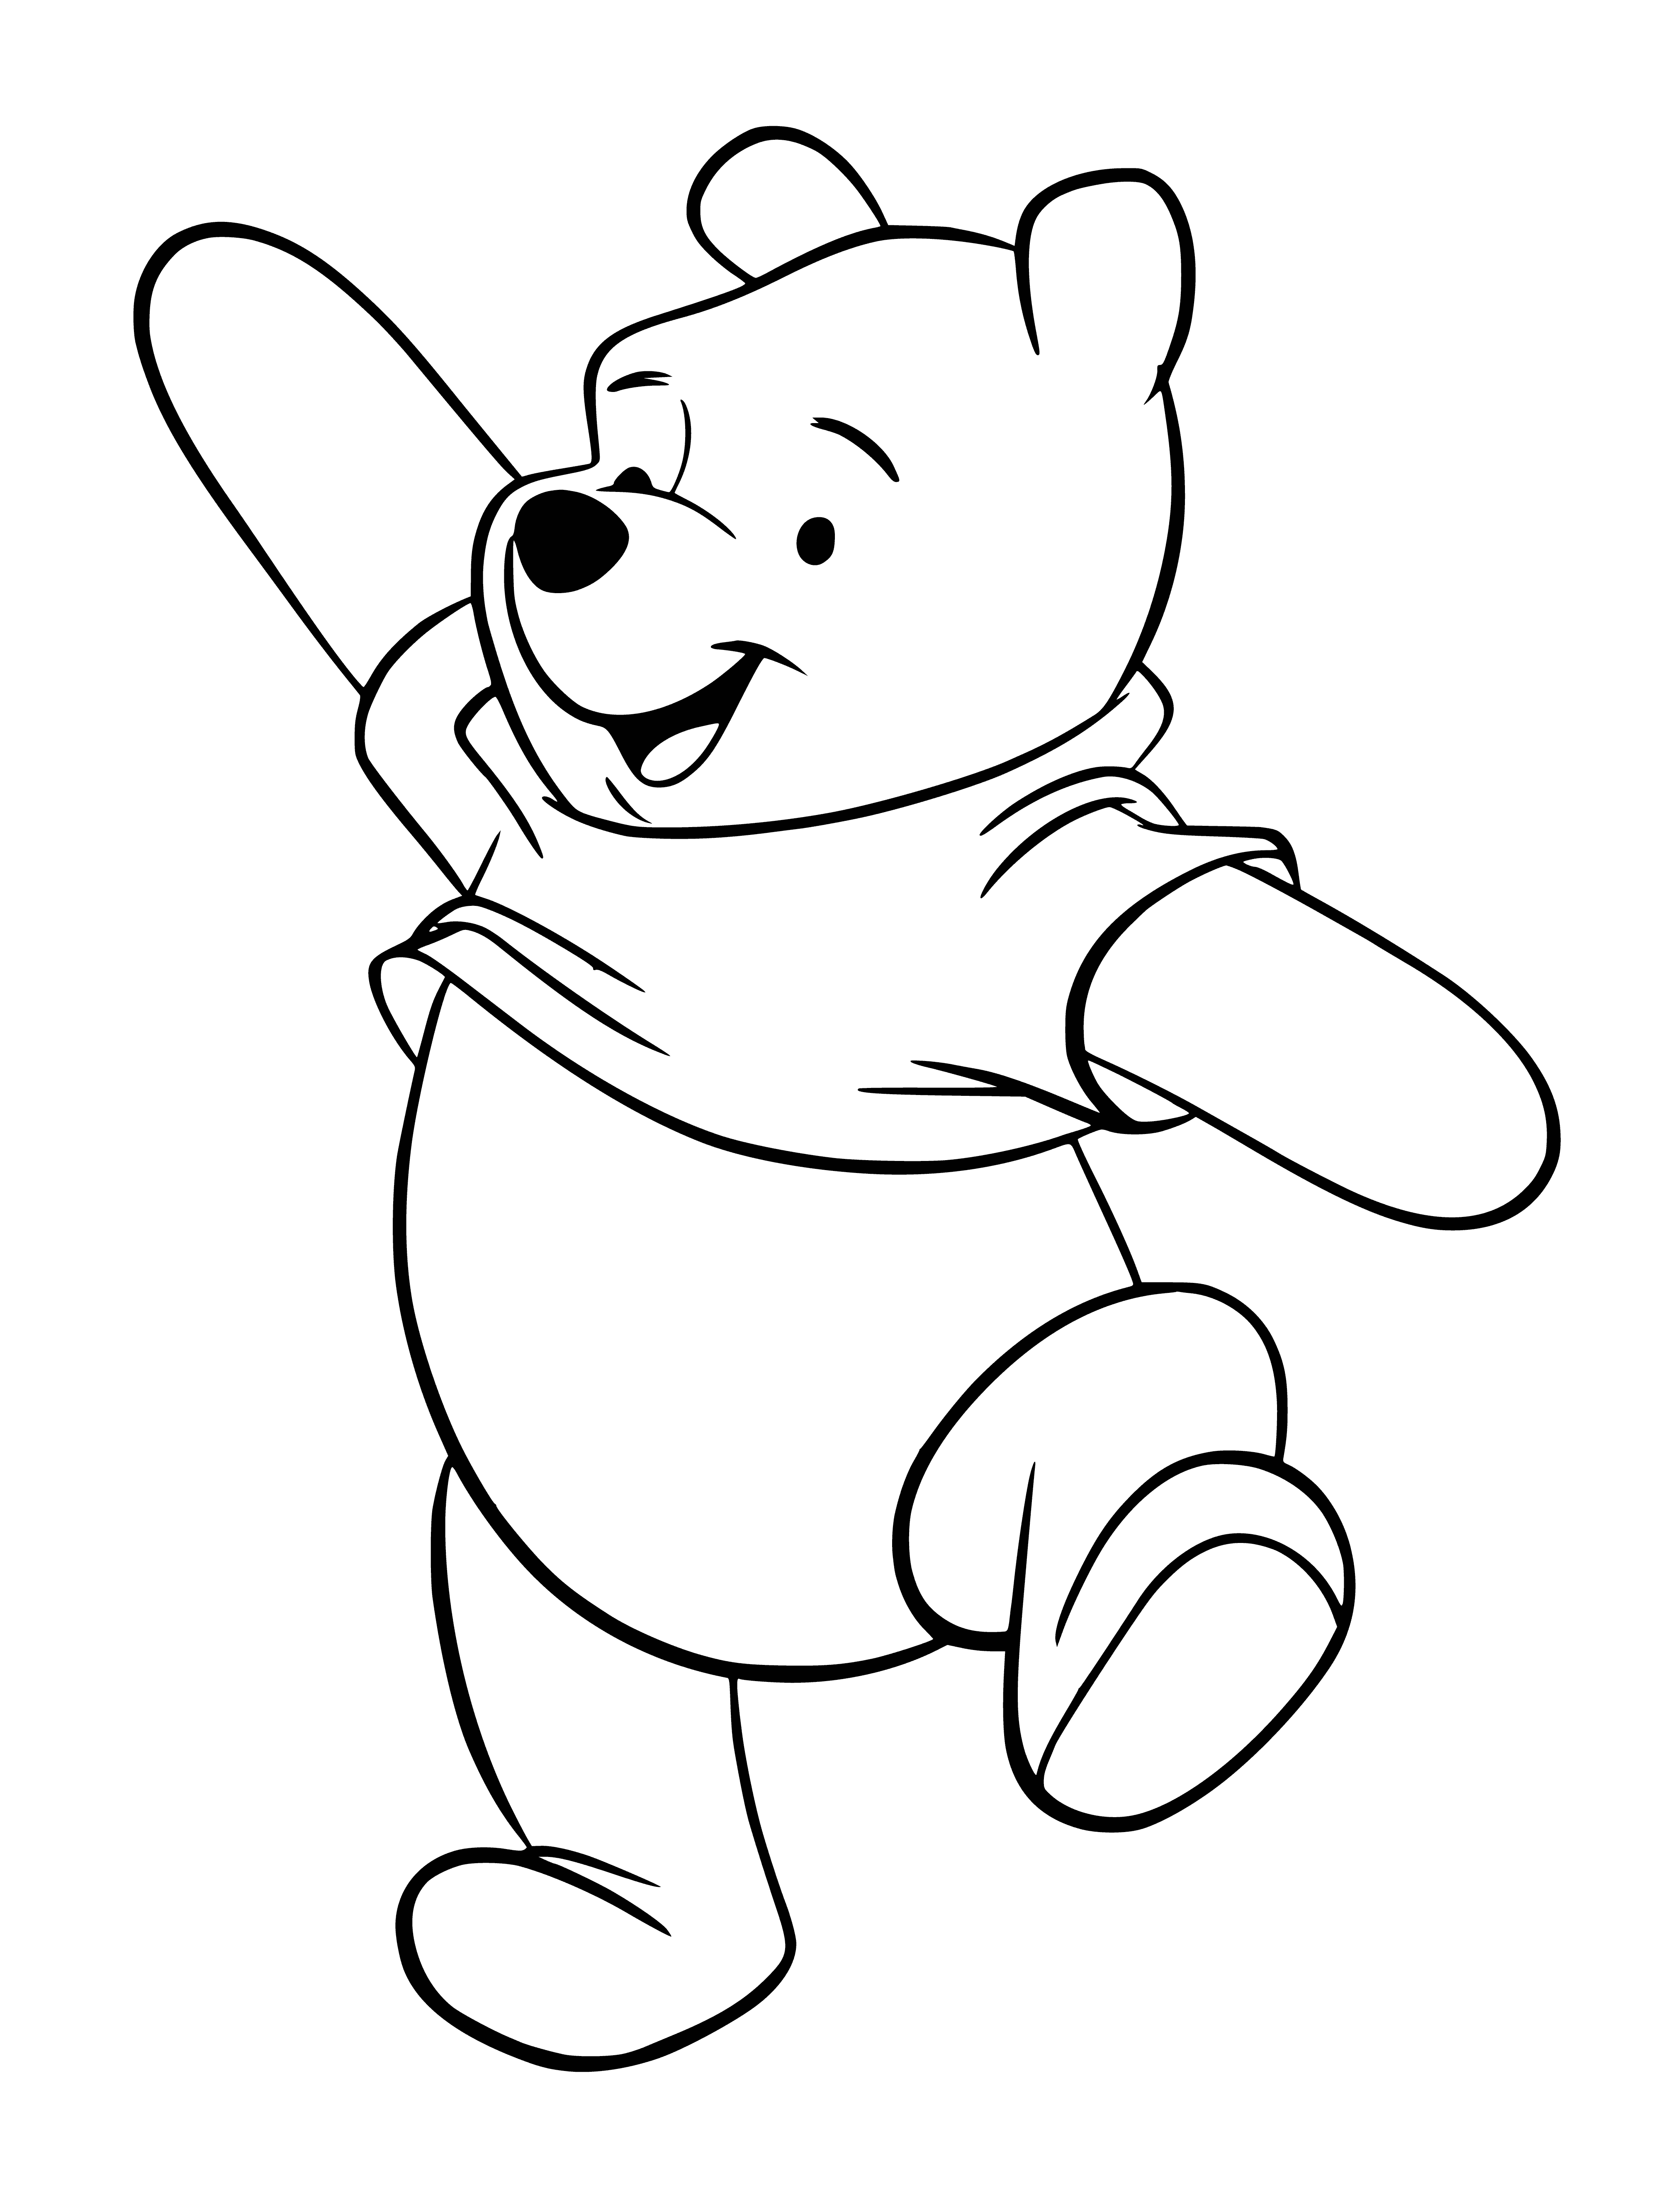 coloring page: Winnie the Pooh sits on a bench, surrounded by flowers & trees, with a big smile. He looks happy, and the sky is blue.